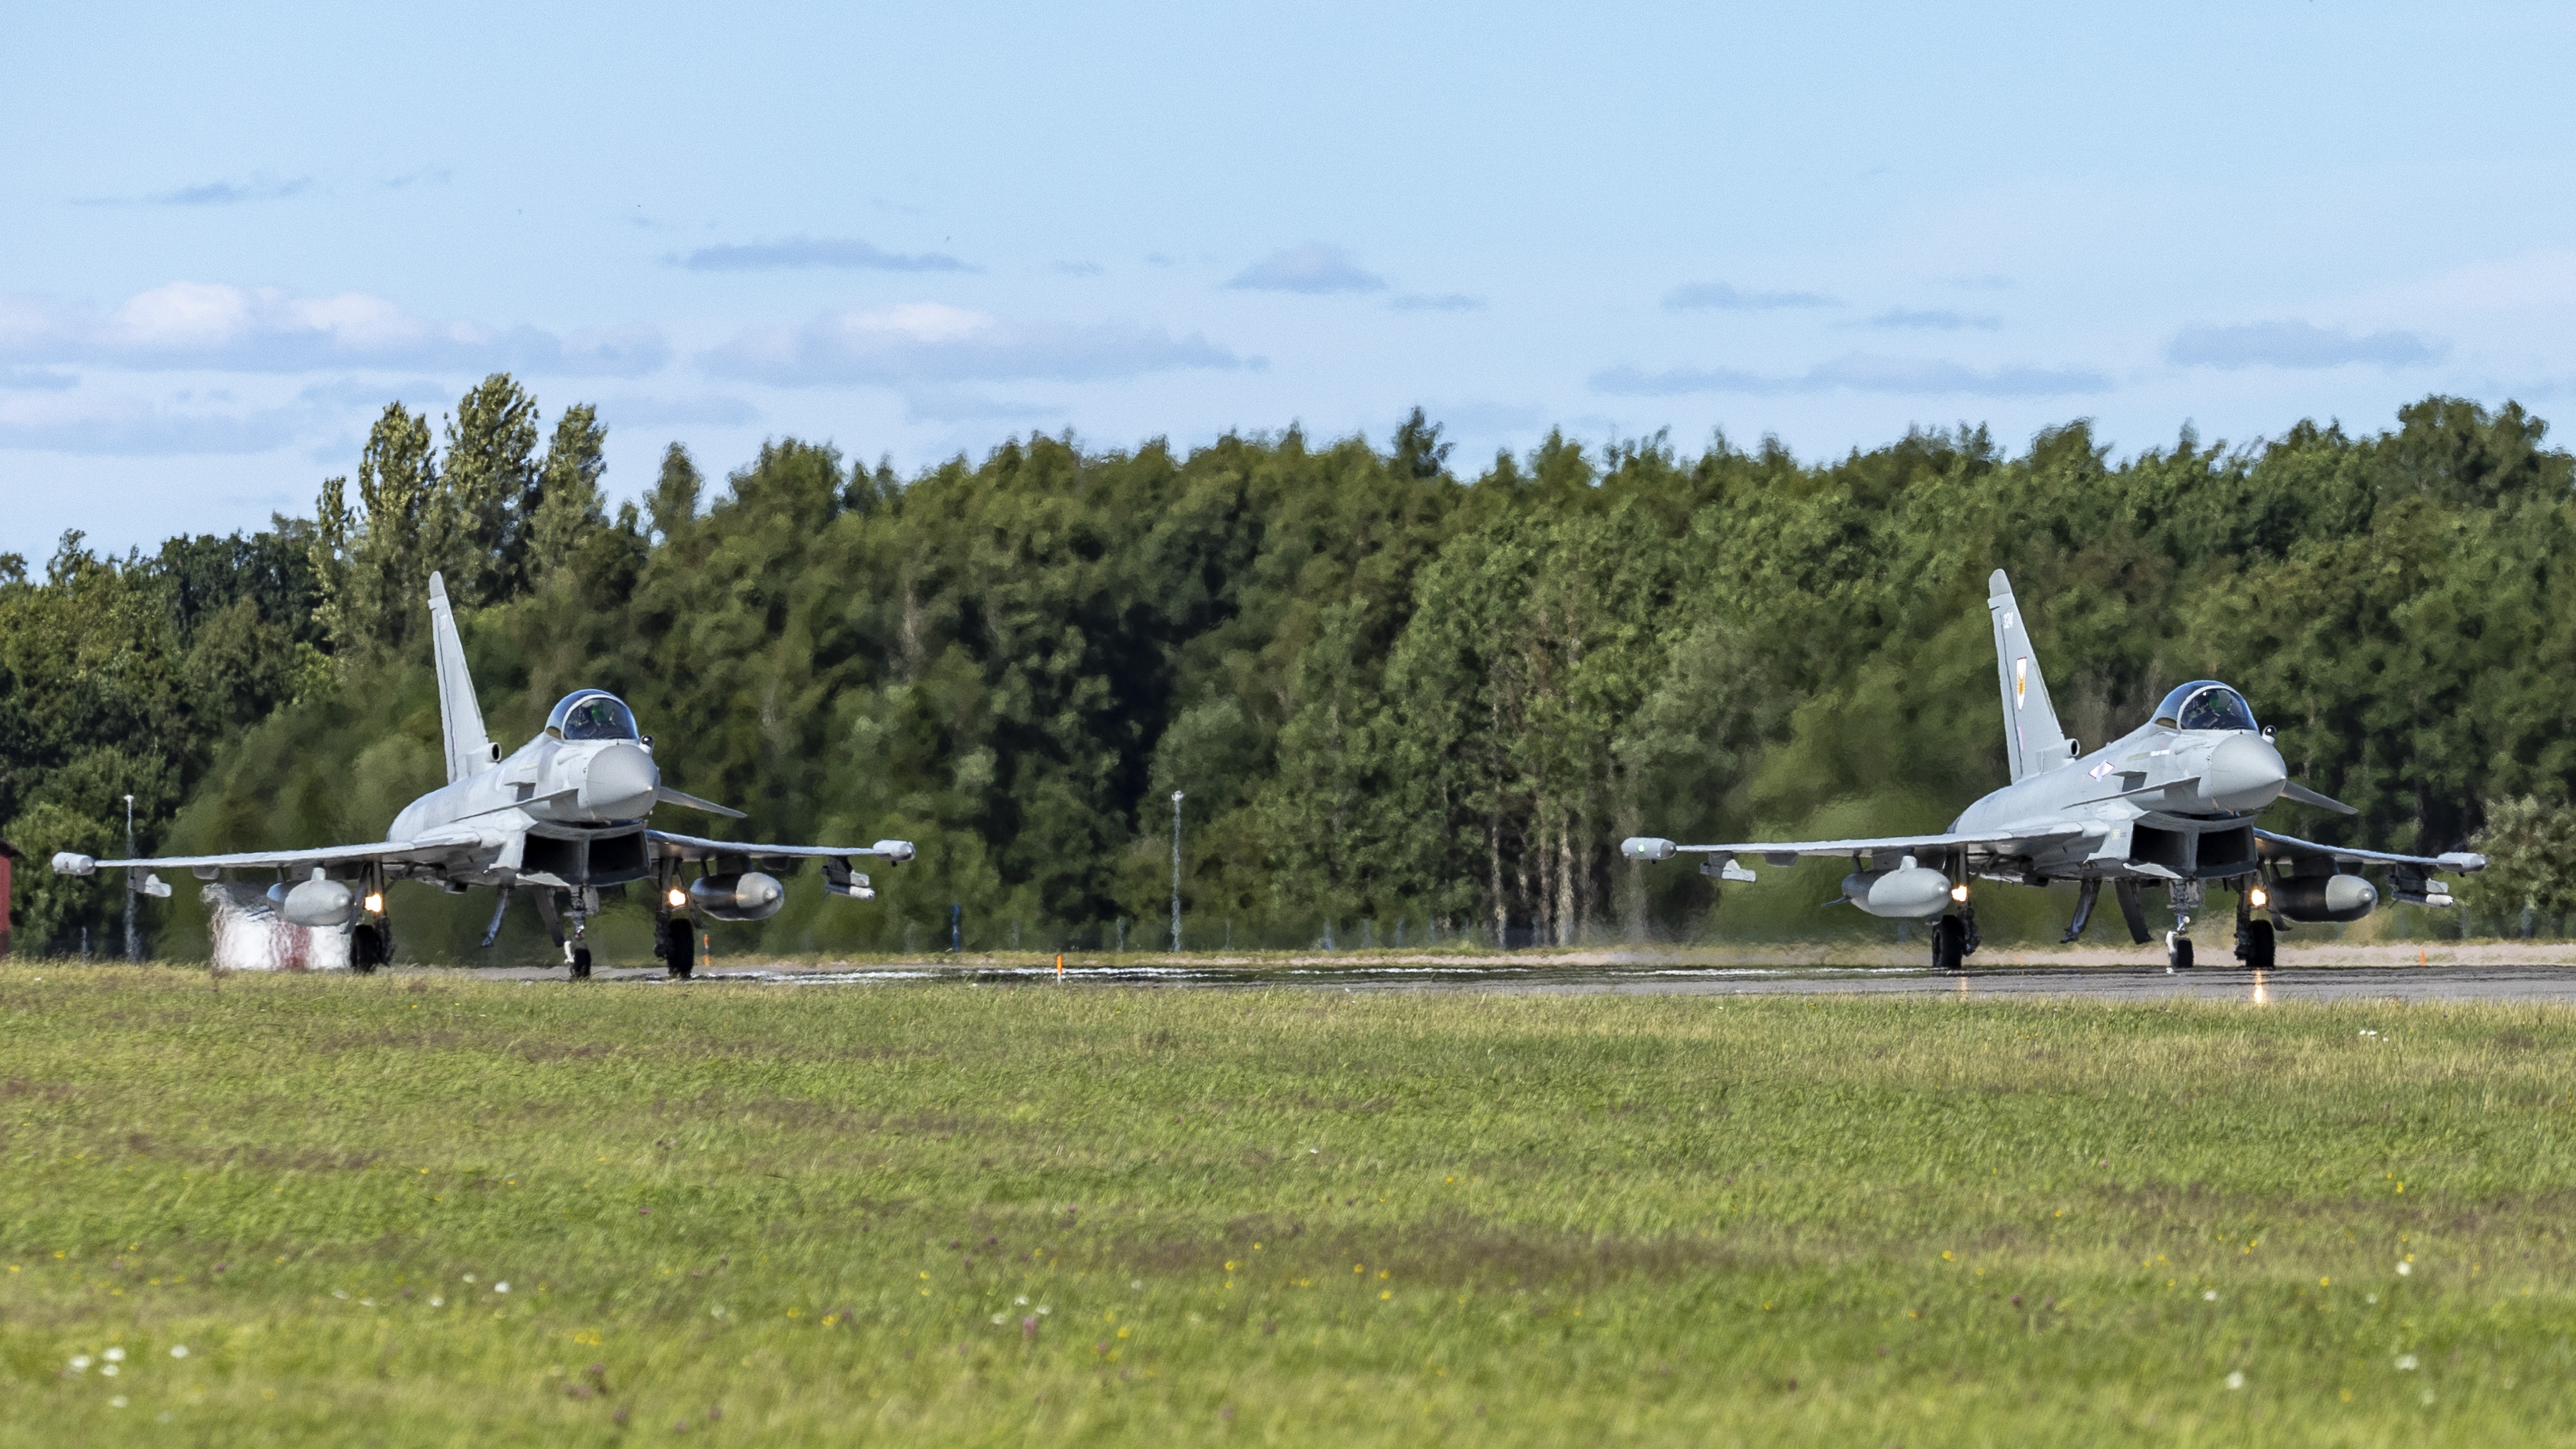 Image shows two RAF Typhoons on the runway about to take off.